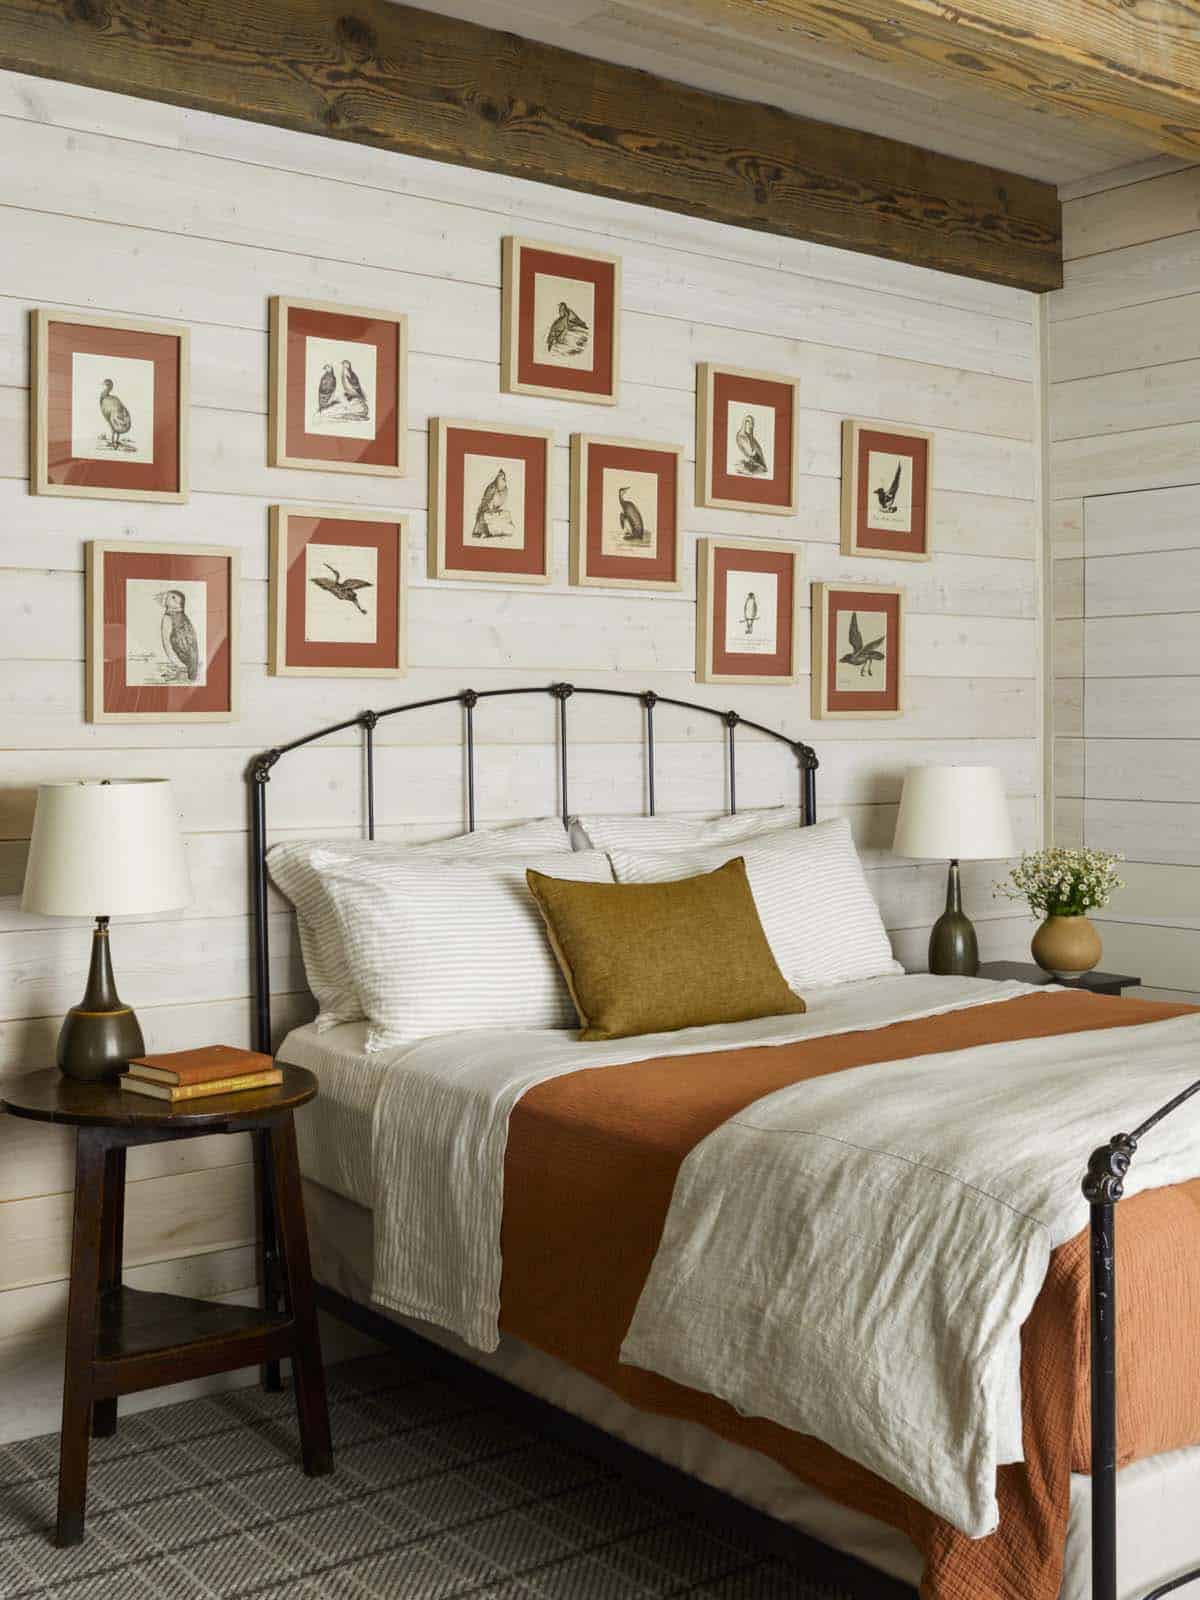 modern rustic bedroom with tongue and groove paneling in white and art gallery wall